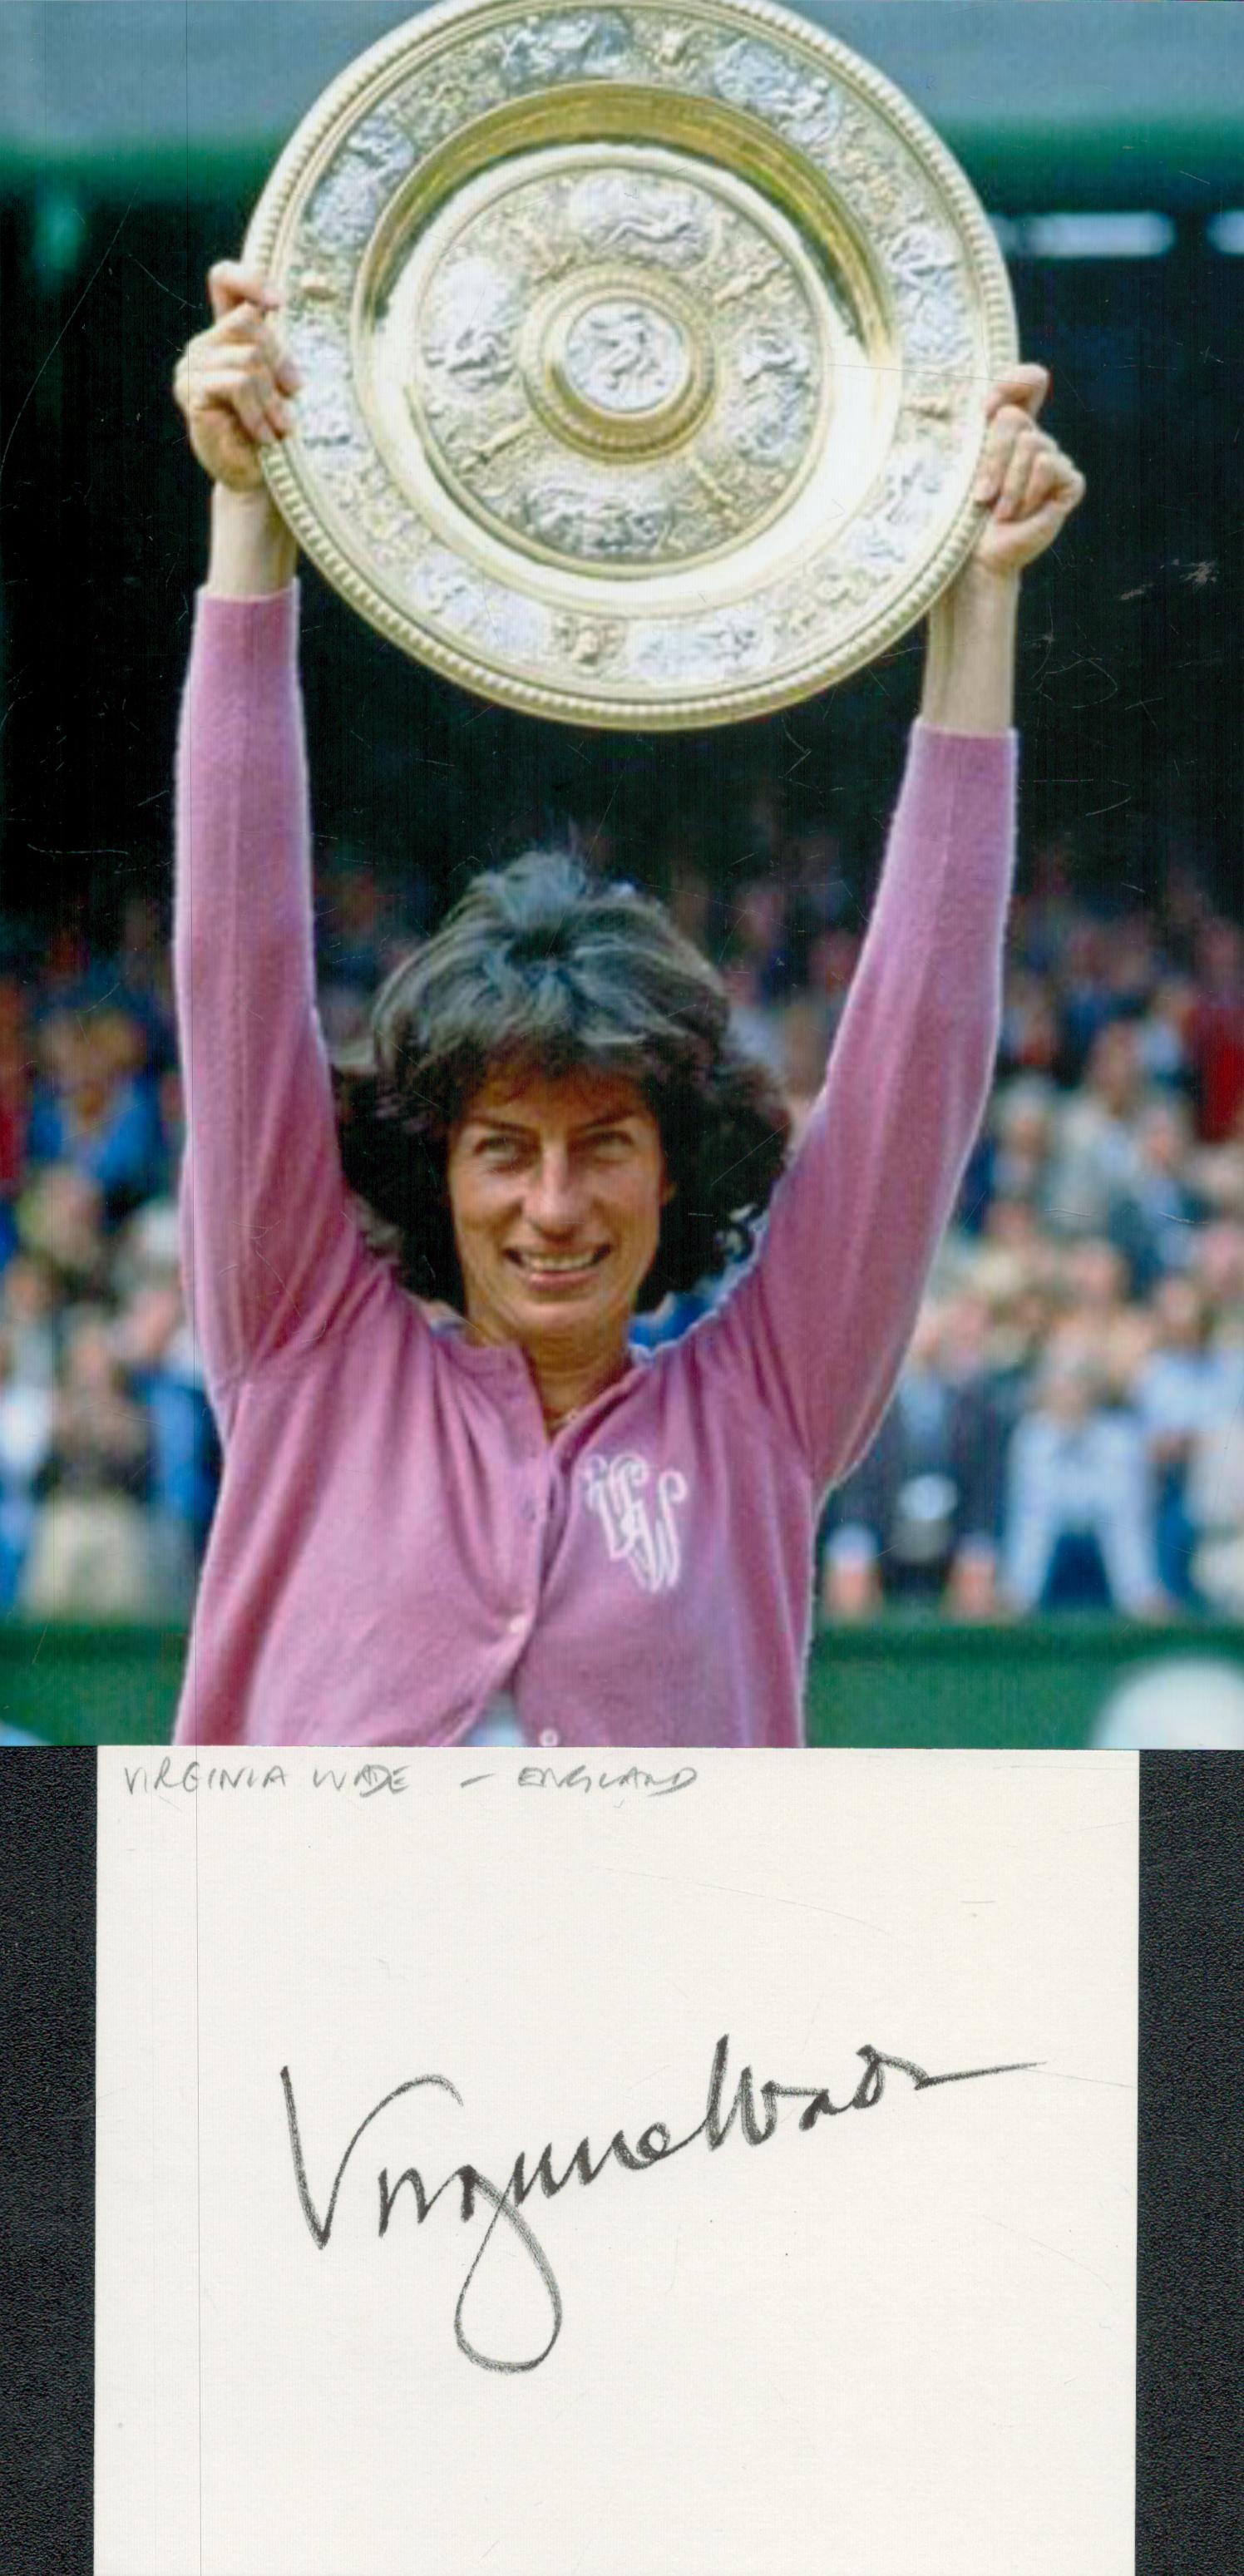 VIRGINIA WADE 1977 Wimbledon Open Winner signed card with Tennis Photo. Good Condition. All